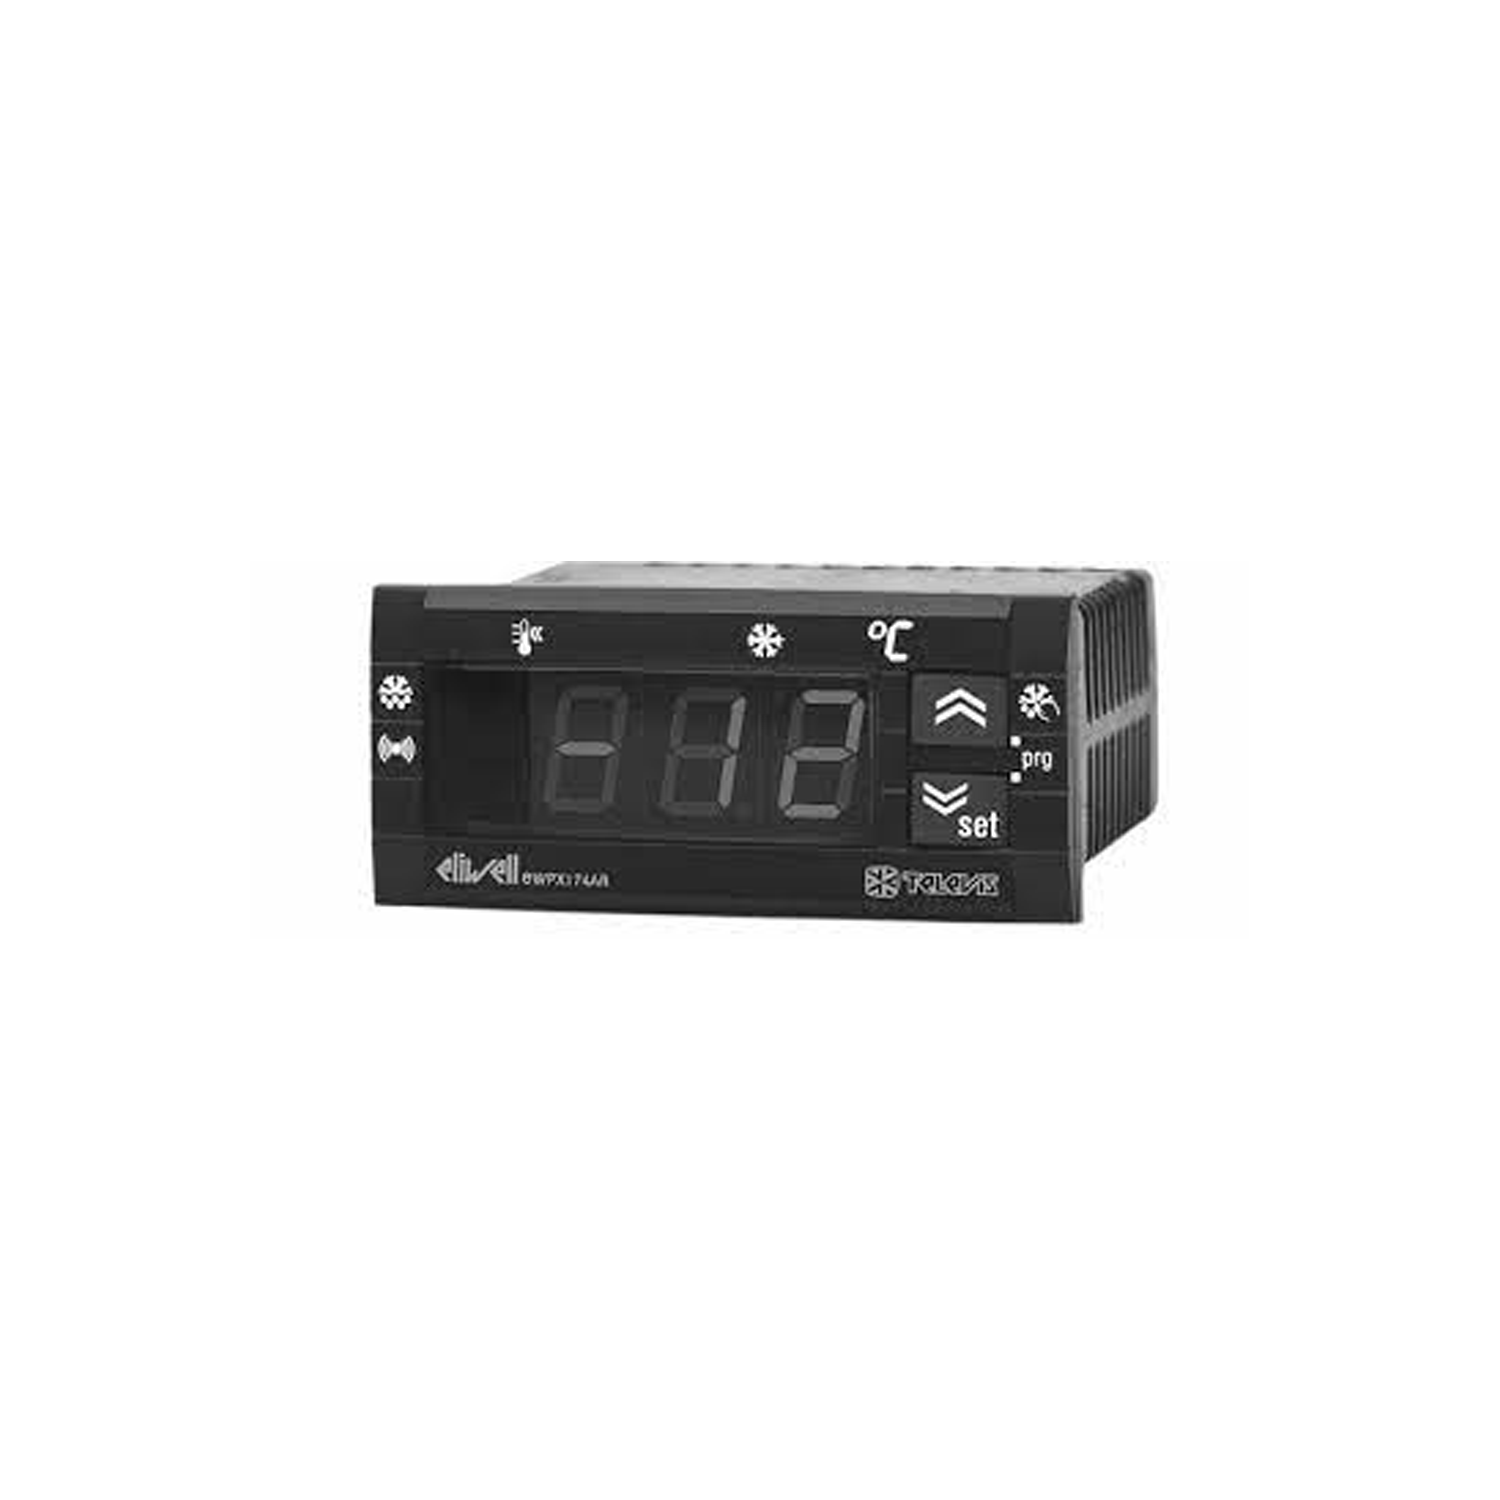 Eliwell EWPX174 AR cold store controller with buzzer BT